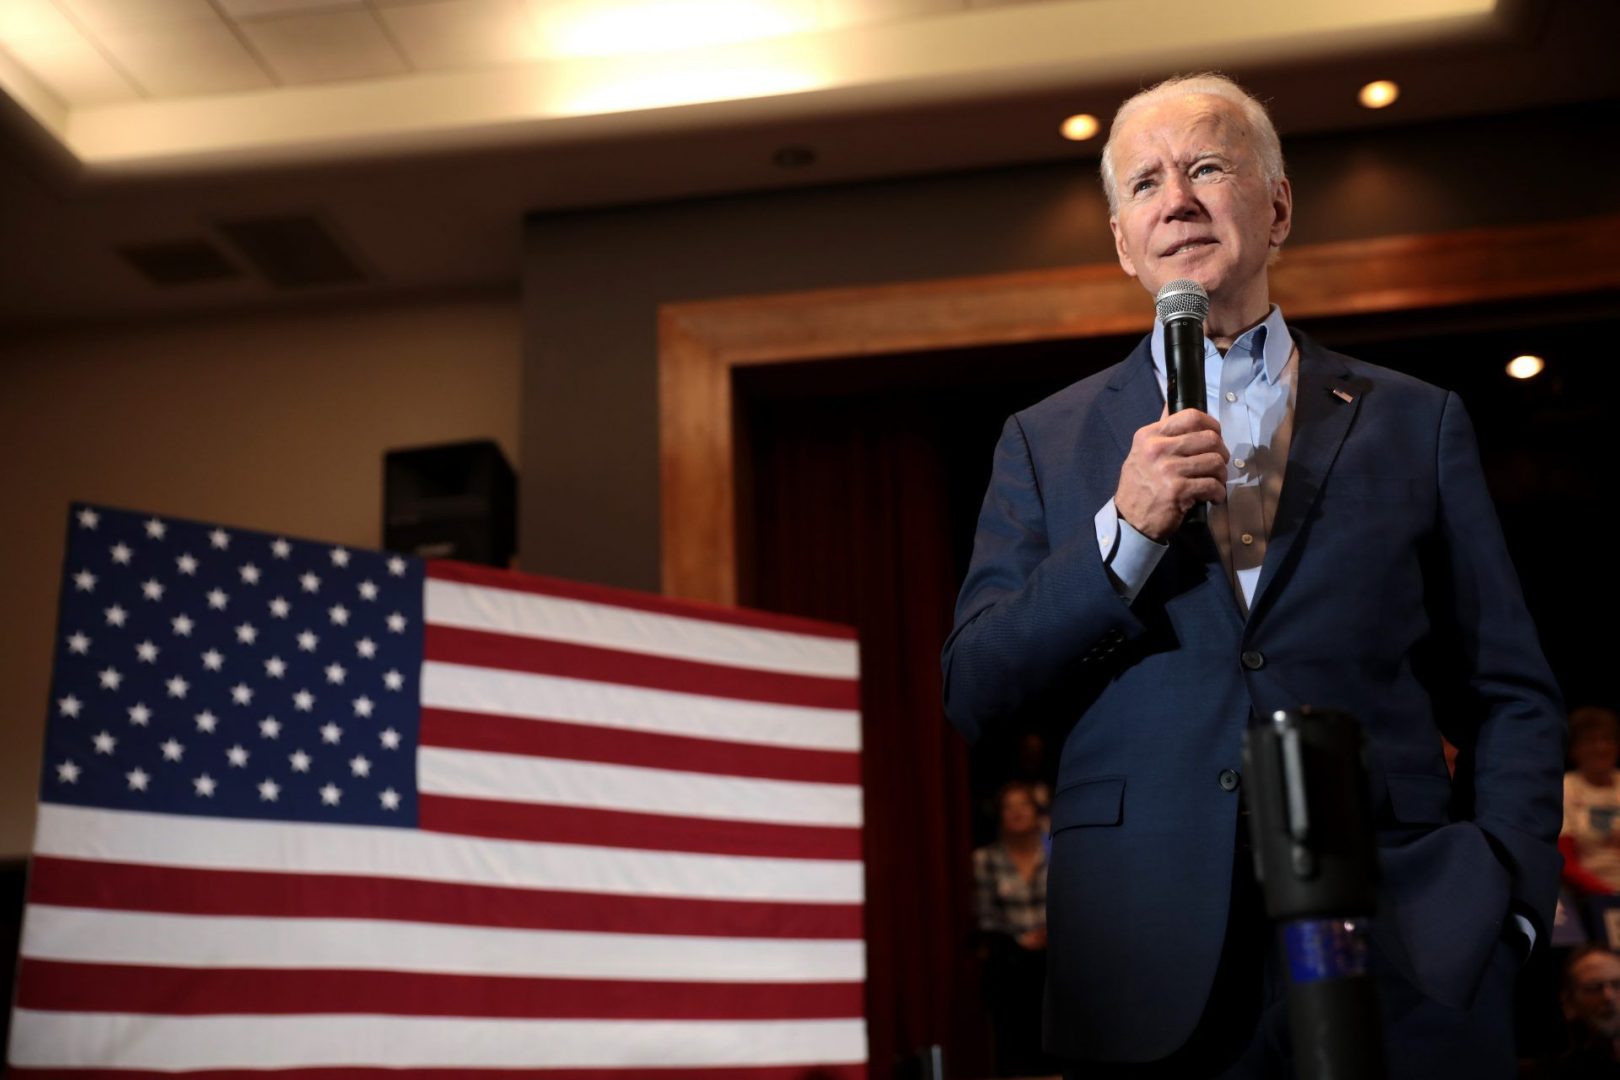 Joe Biden, A Timeline To The World’s Most Powerful Seat